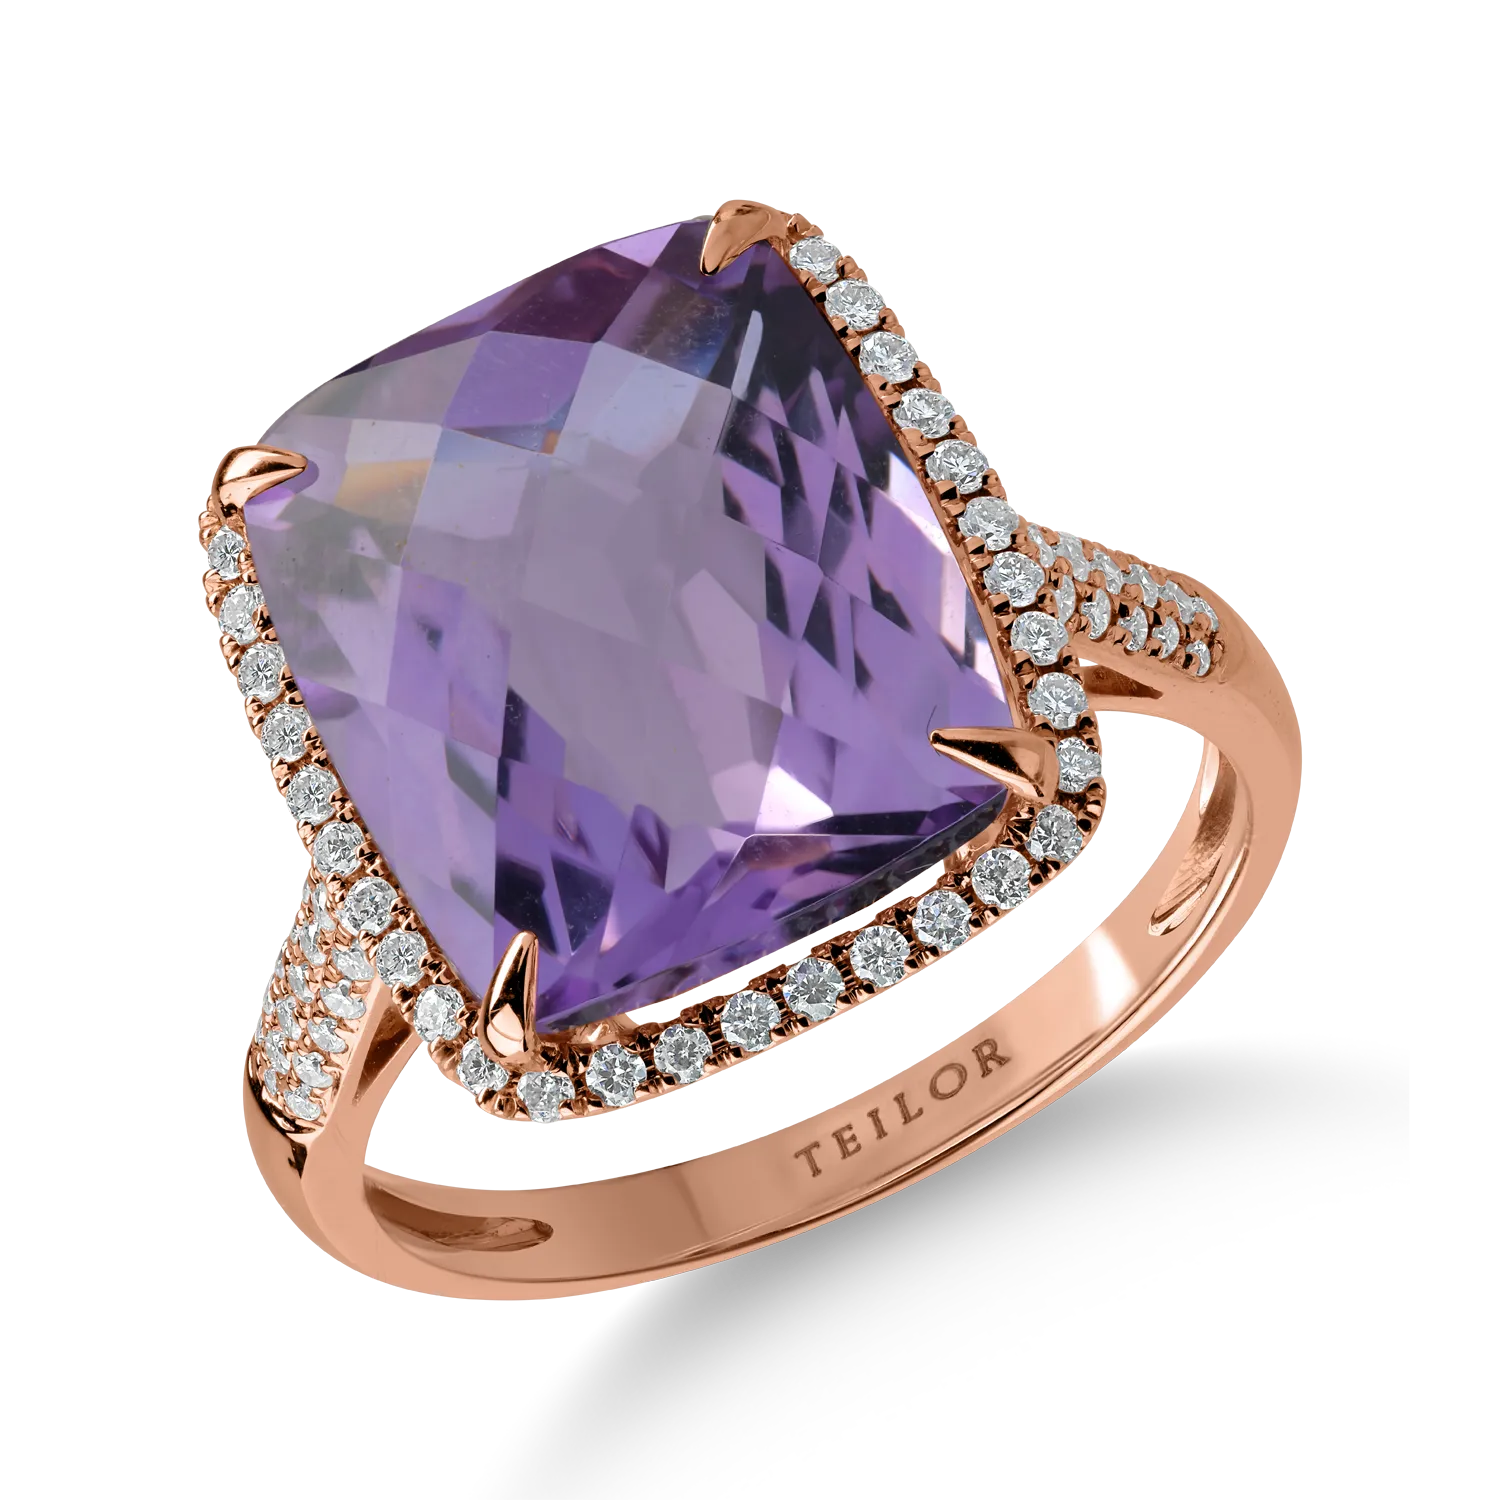 Rose gold ring with 7.5ct pink amethyst and 0.36ct diamonds